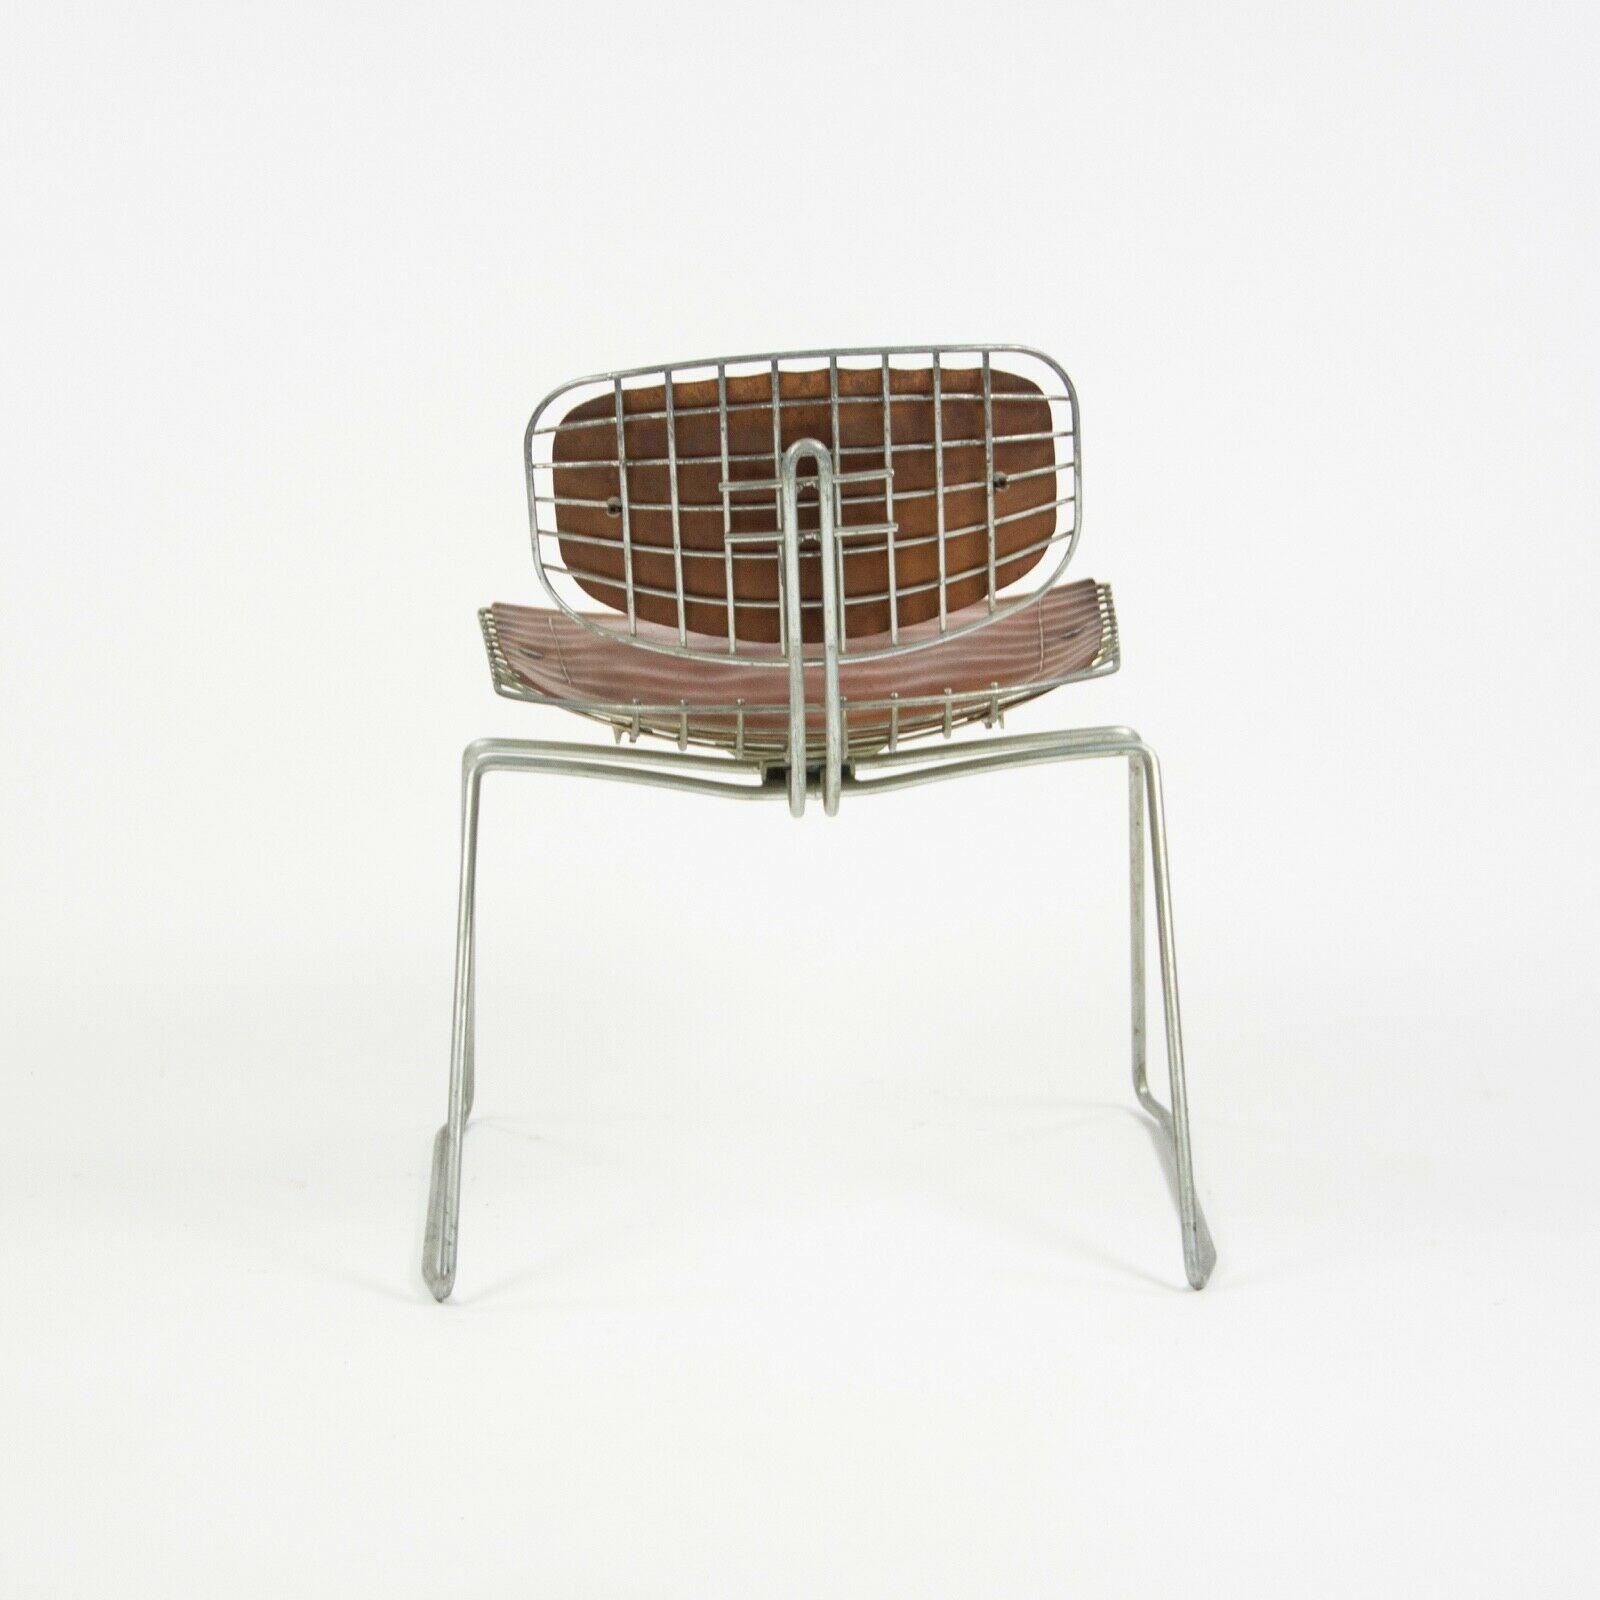 SOLD 1976 Michel Cadestin & Georges Laurent Beaubourg Chair Teda France for Centre Pompidou